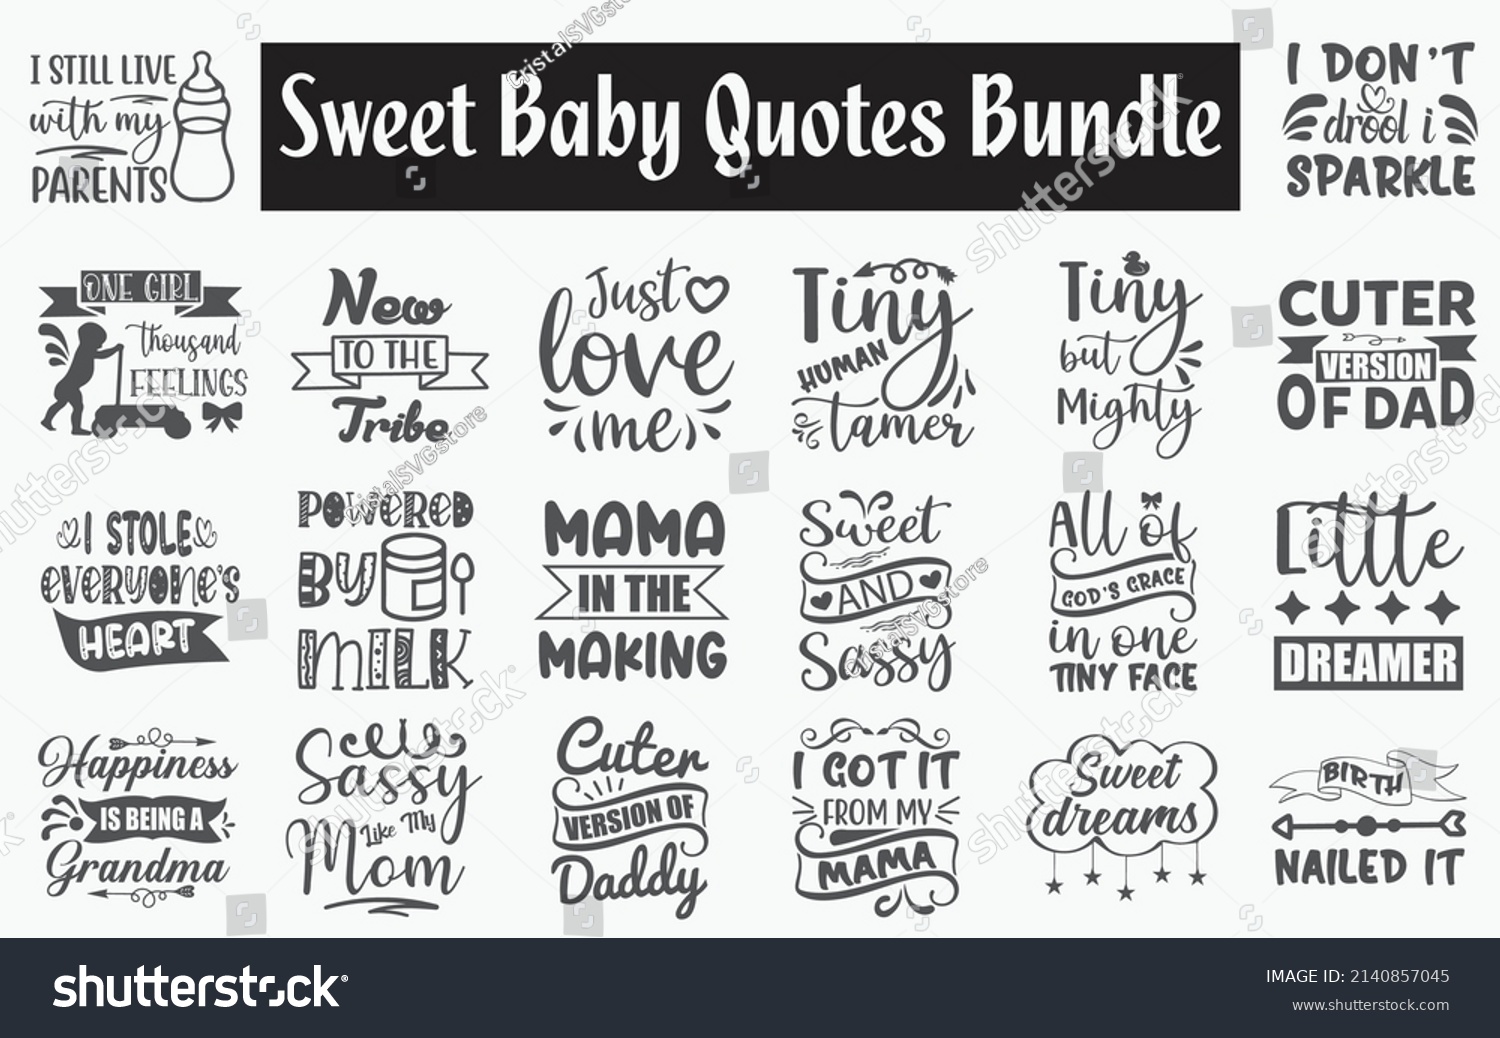 SVG of 
Sweet baby Quotes SVG Cut Files Designs Bundle. Sweet baby quotes SVG cut files, Sweet baby quotes t shirt designs, Saying about Babies, Babies cut files, Inspiration quotes eps files, SVG bundle svg